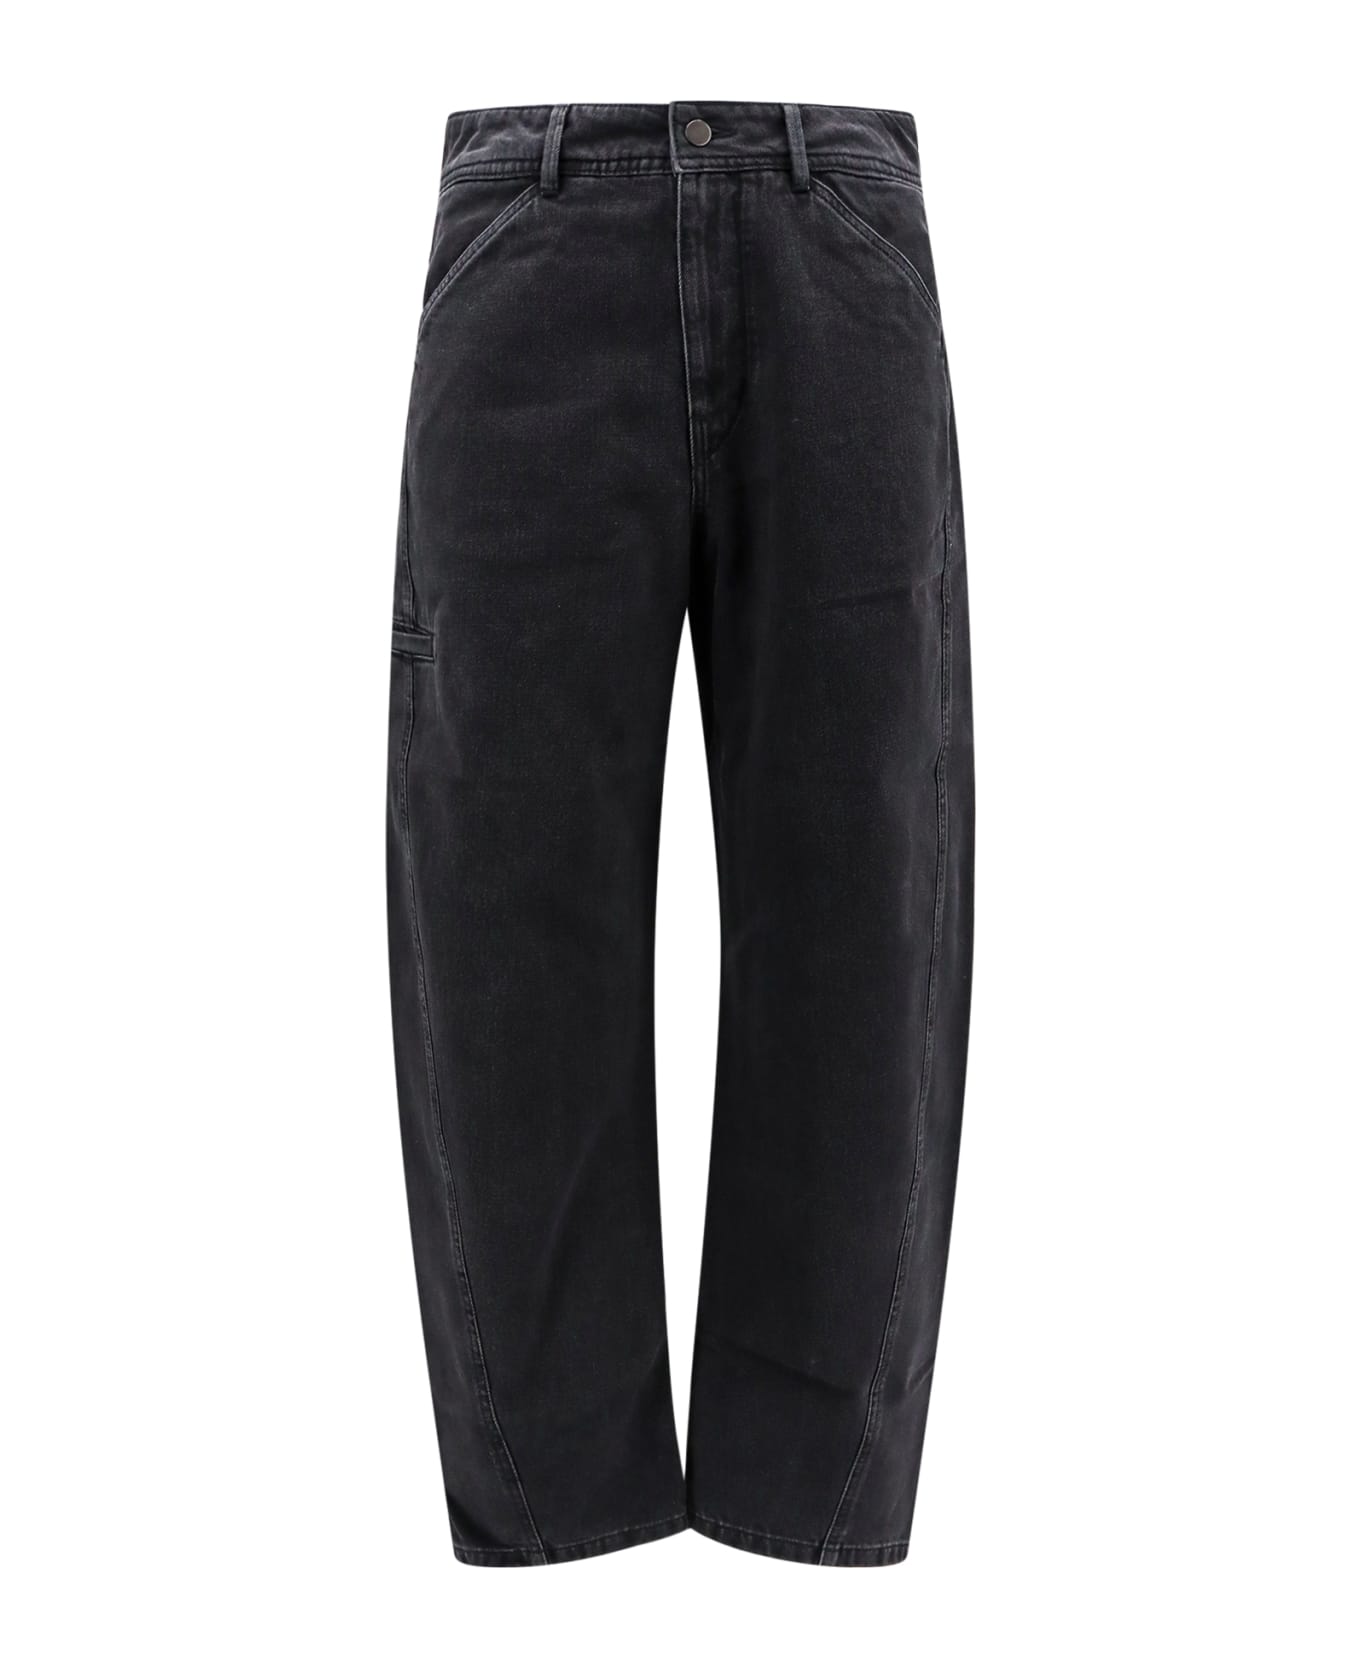 Lemaire Twisted Workwear Pants Jeans - Denim